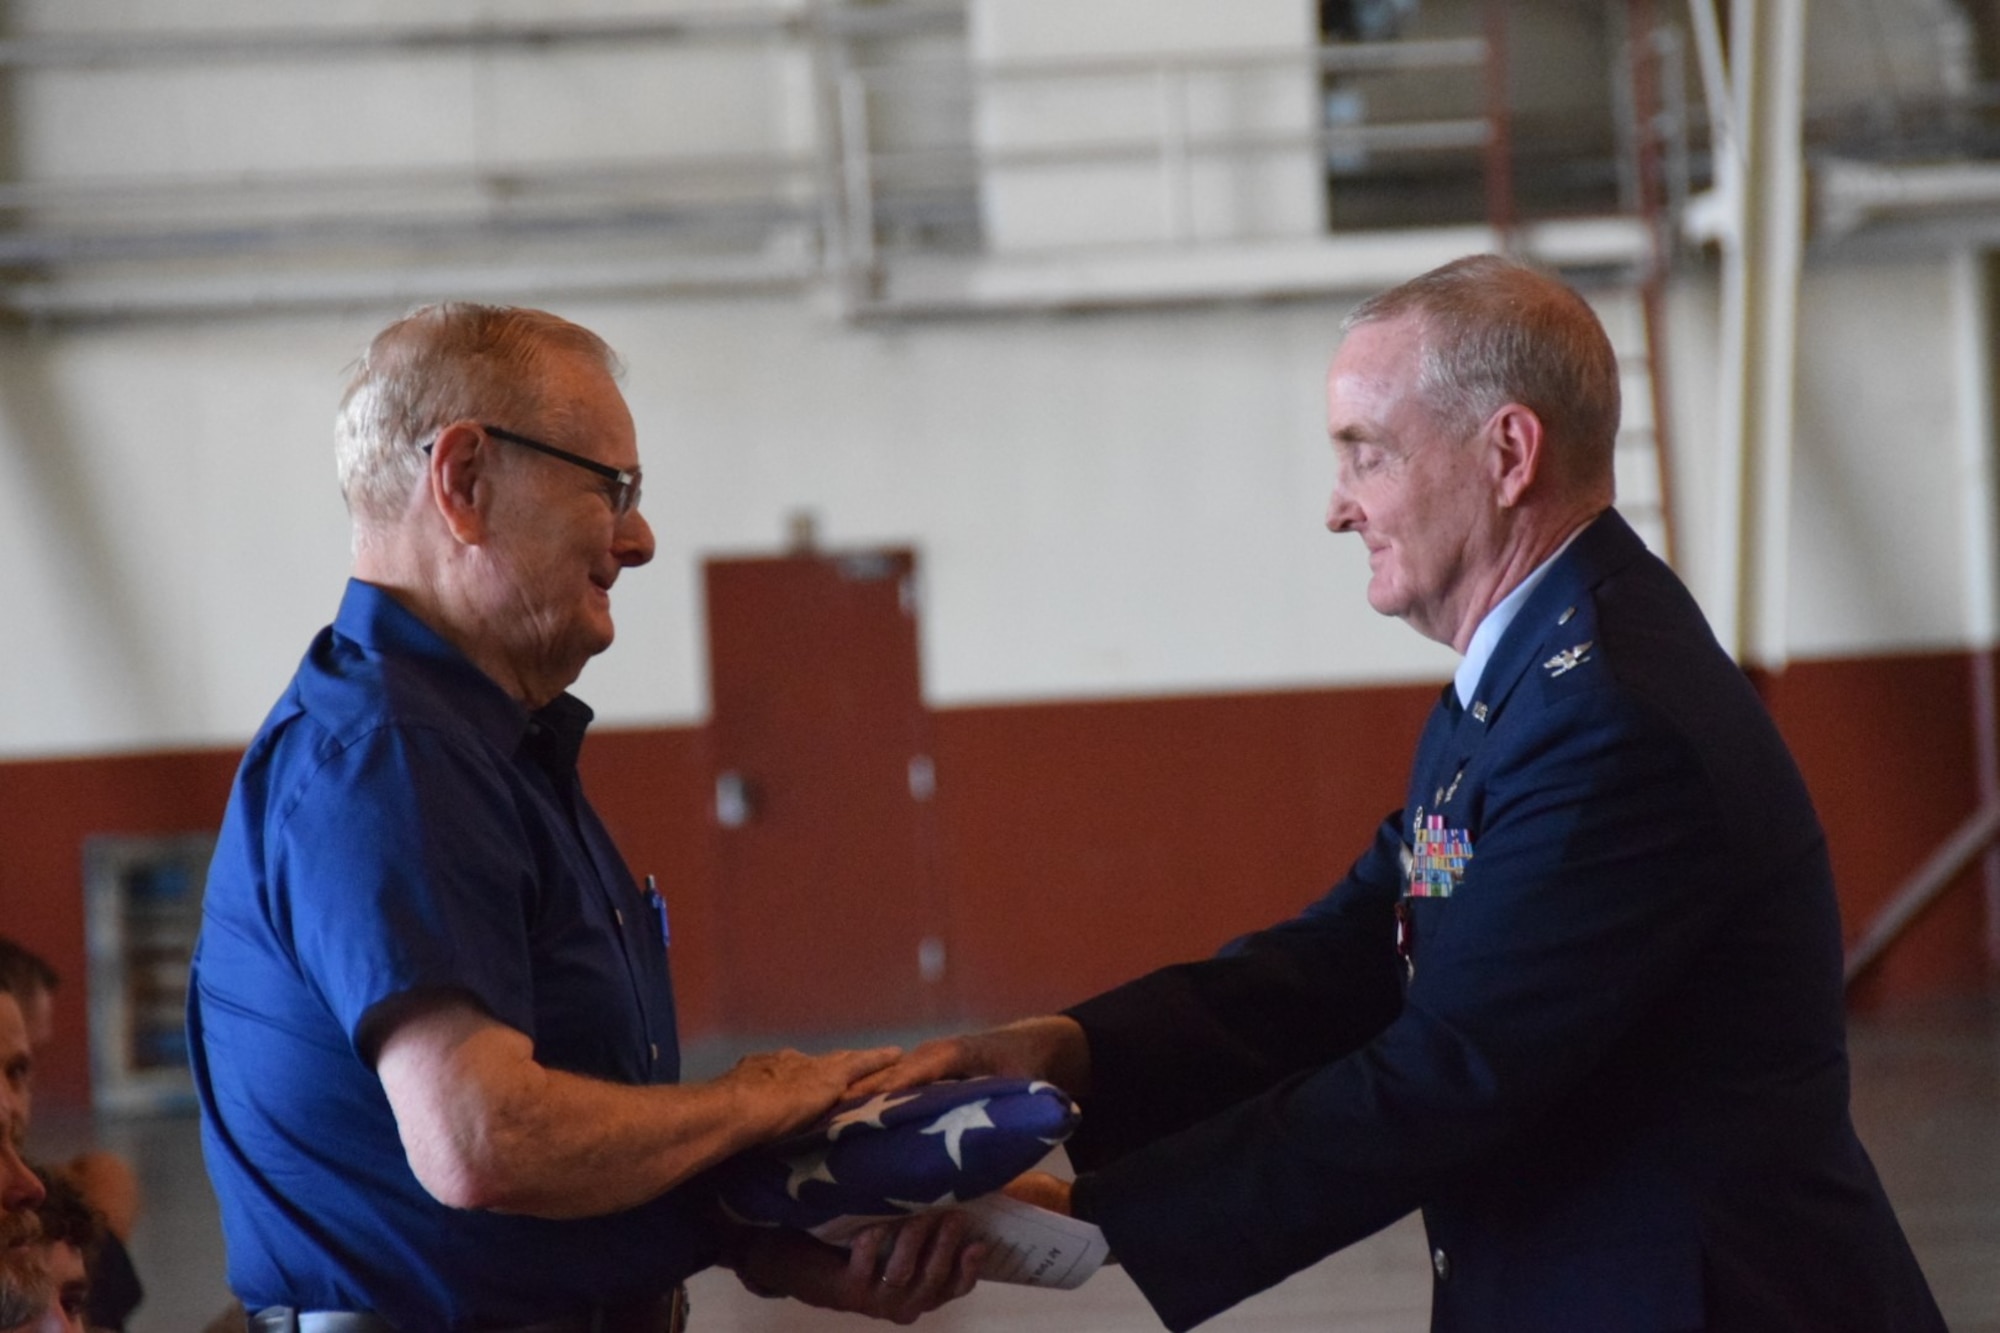 Col. Michael Nelson, 433rd Medical Squadron, pays tribute to his father, Larry Nelson, by giving him the American flag the 433rd Honor Guard had just presented to him at his retirement ceremony May 5, 2018 at Joint Base San Antonio, Texas.  (U.S. Air Force photo by Tech. Sgt. Carlos J. Trevino)